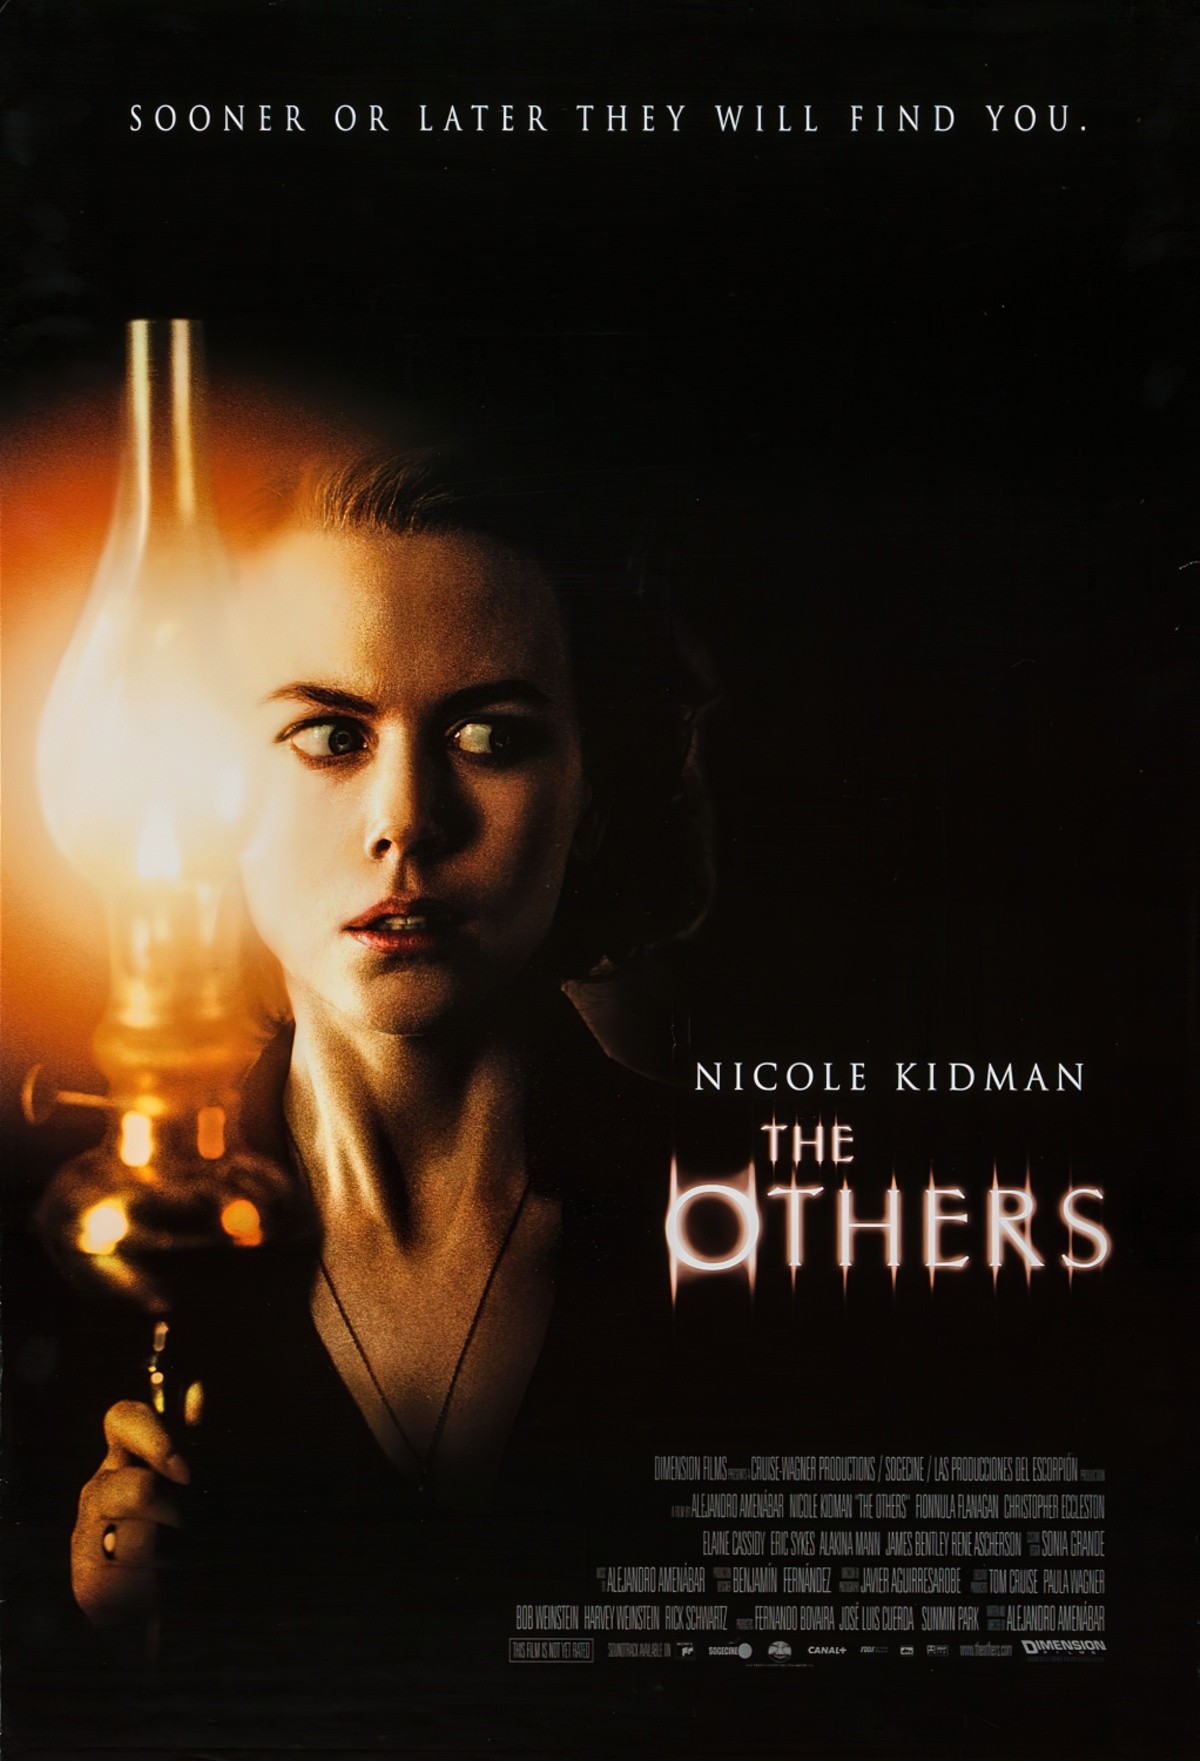 The Others Film Study